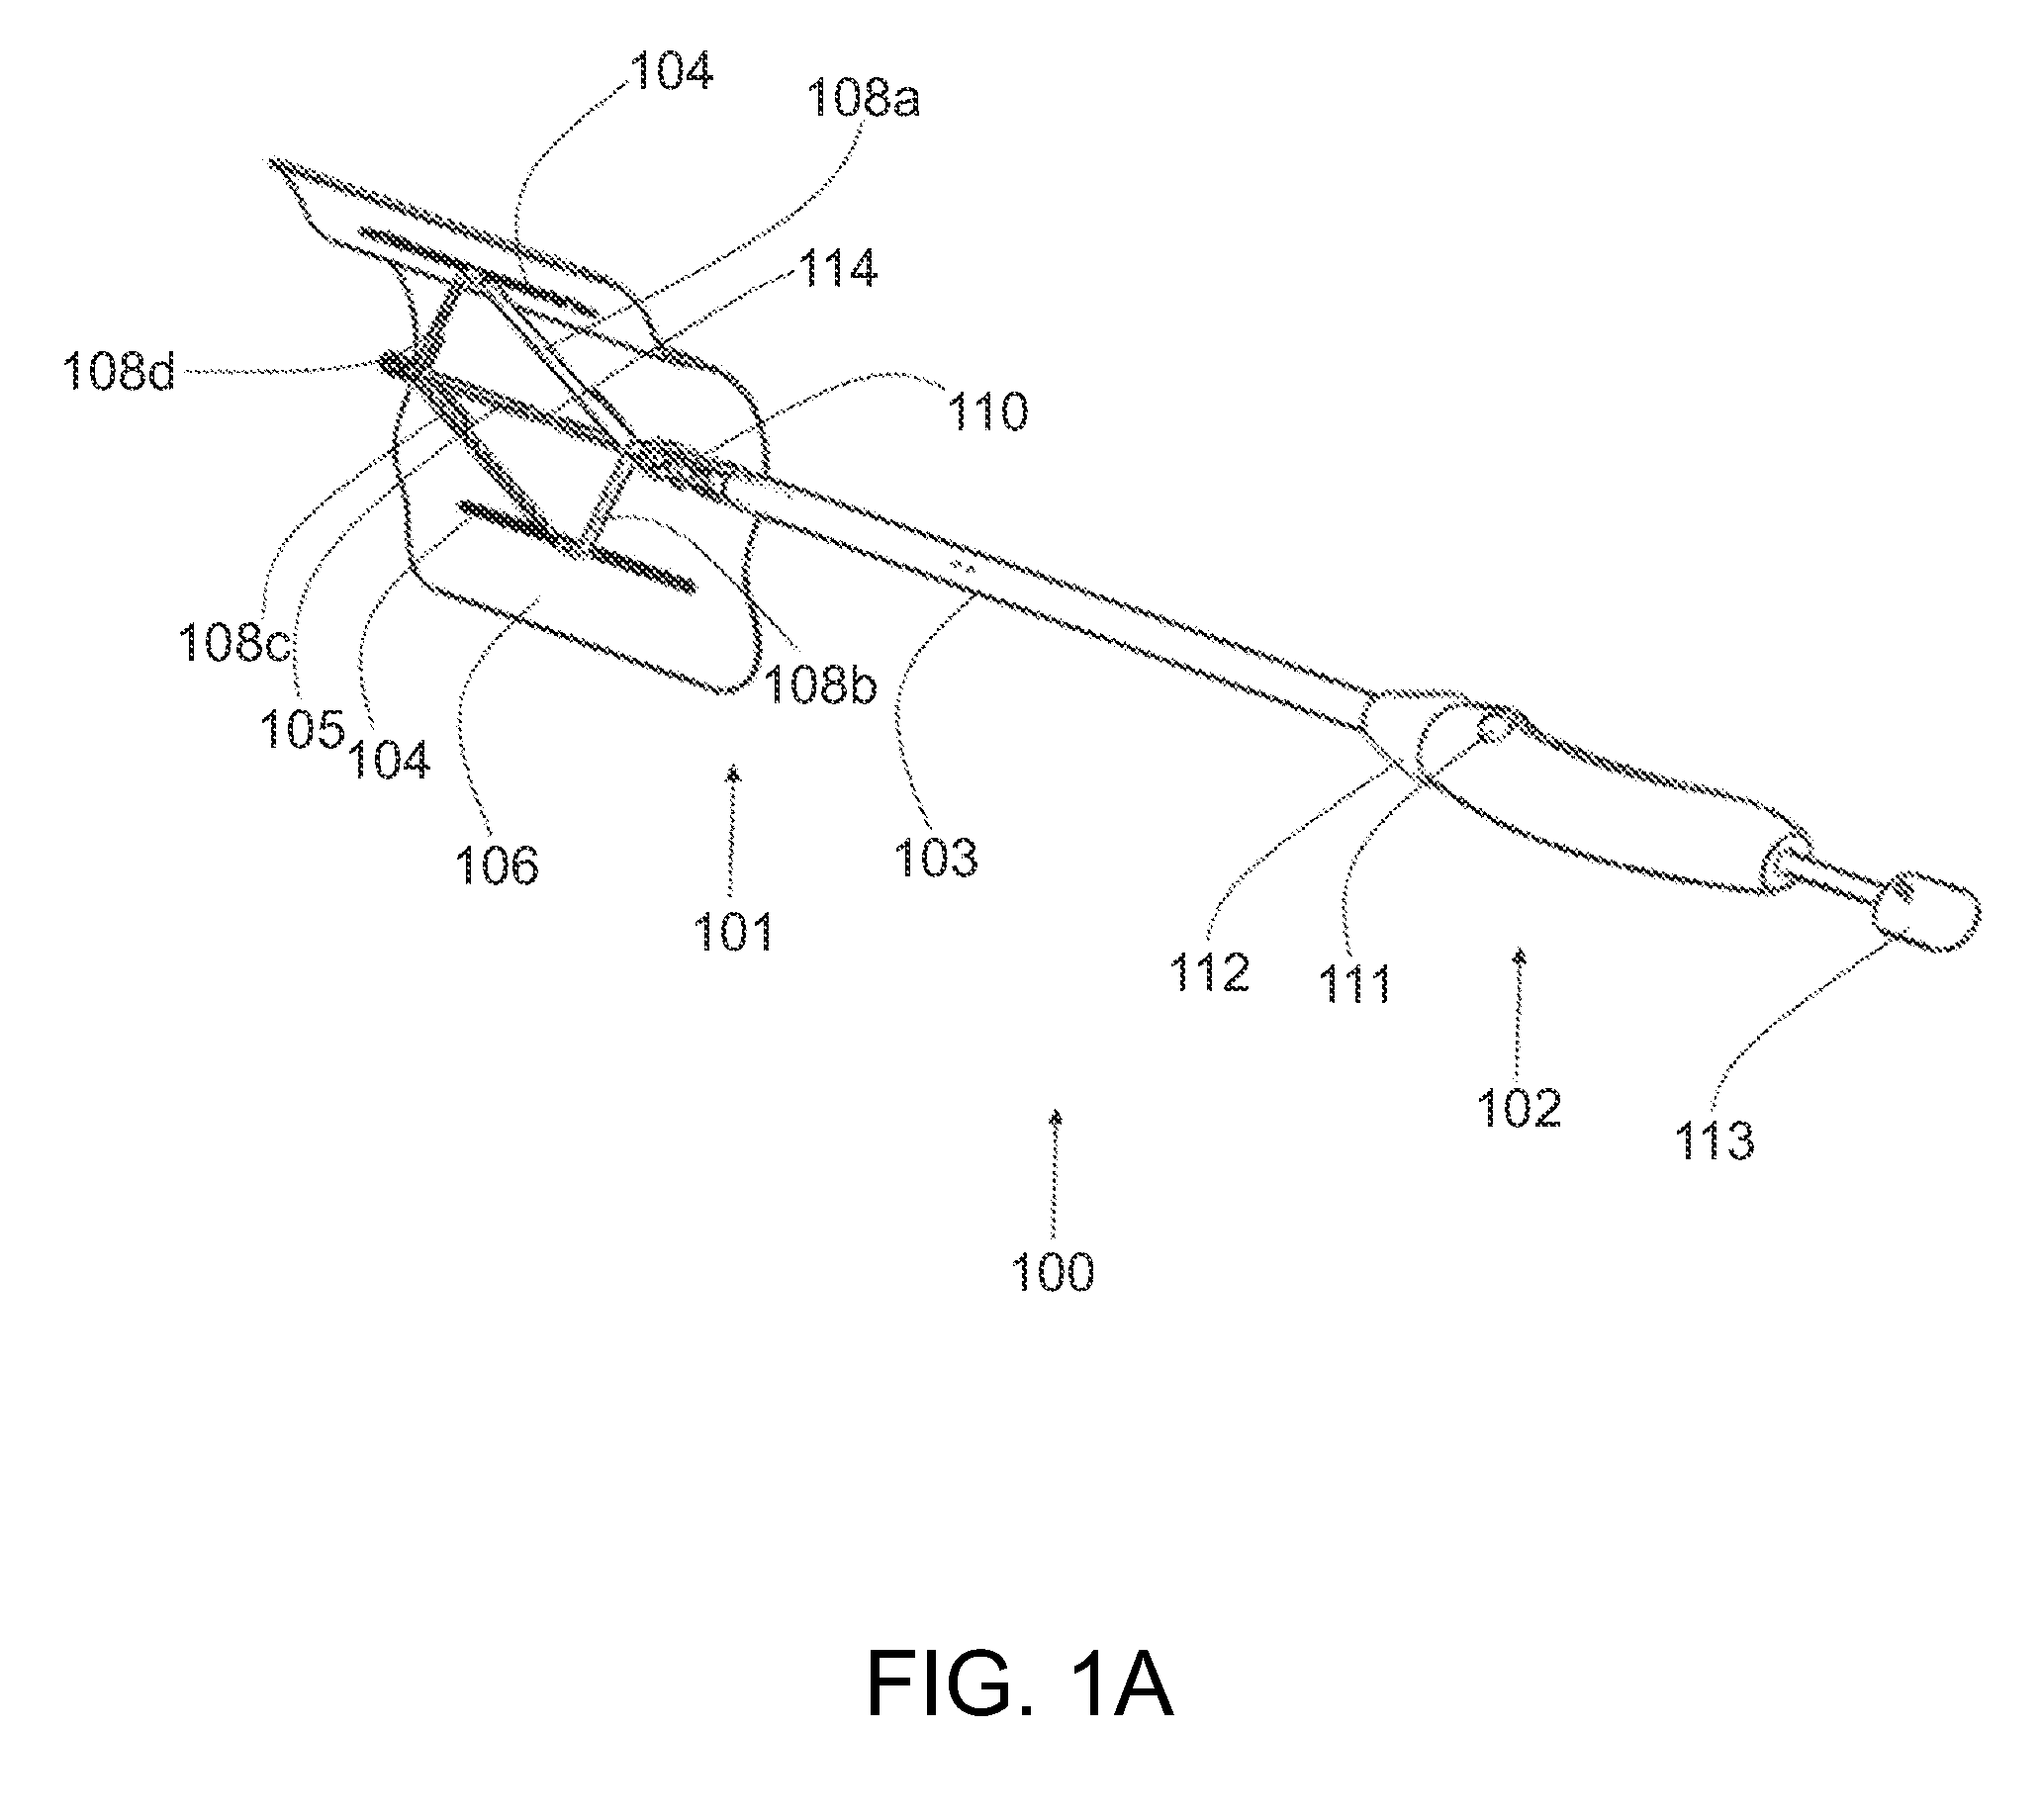 Articulating patch deployment device and method of use